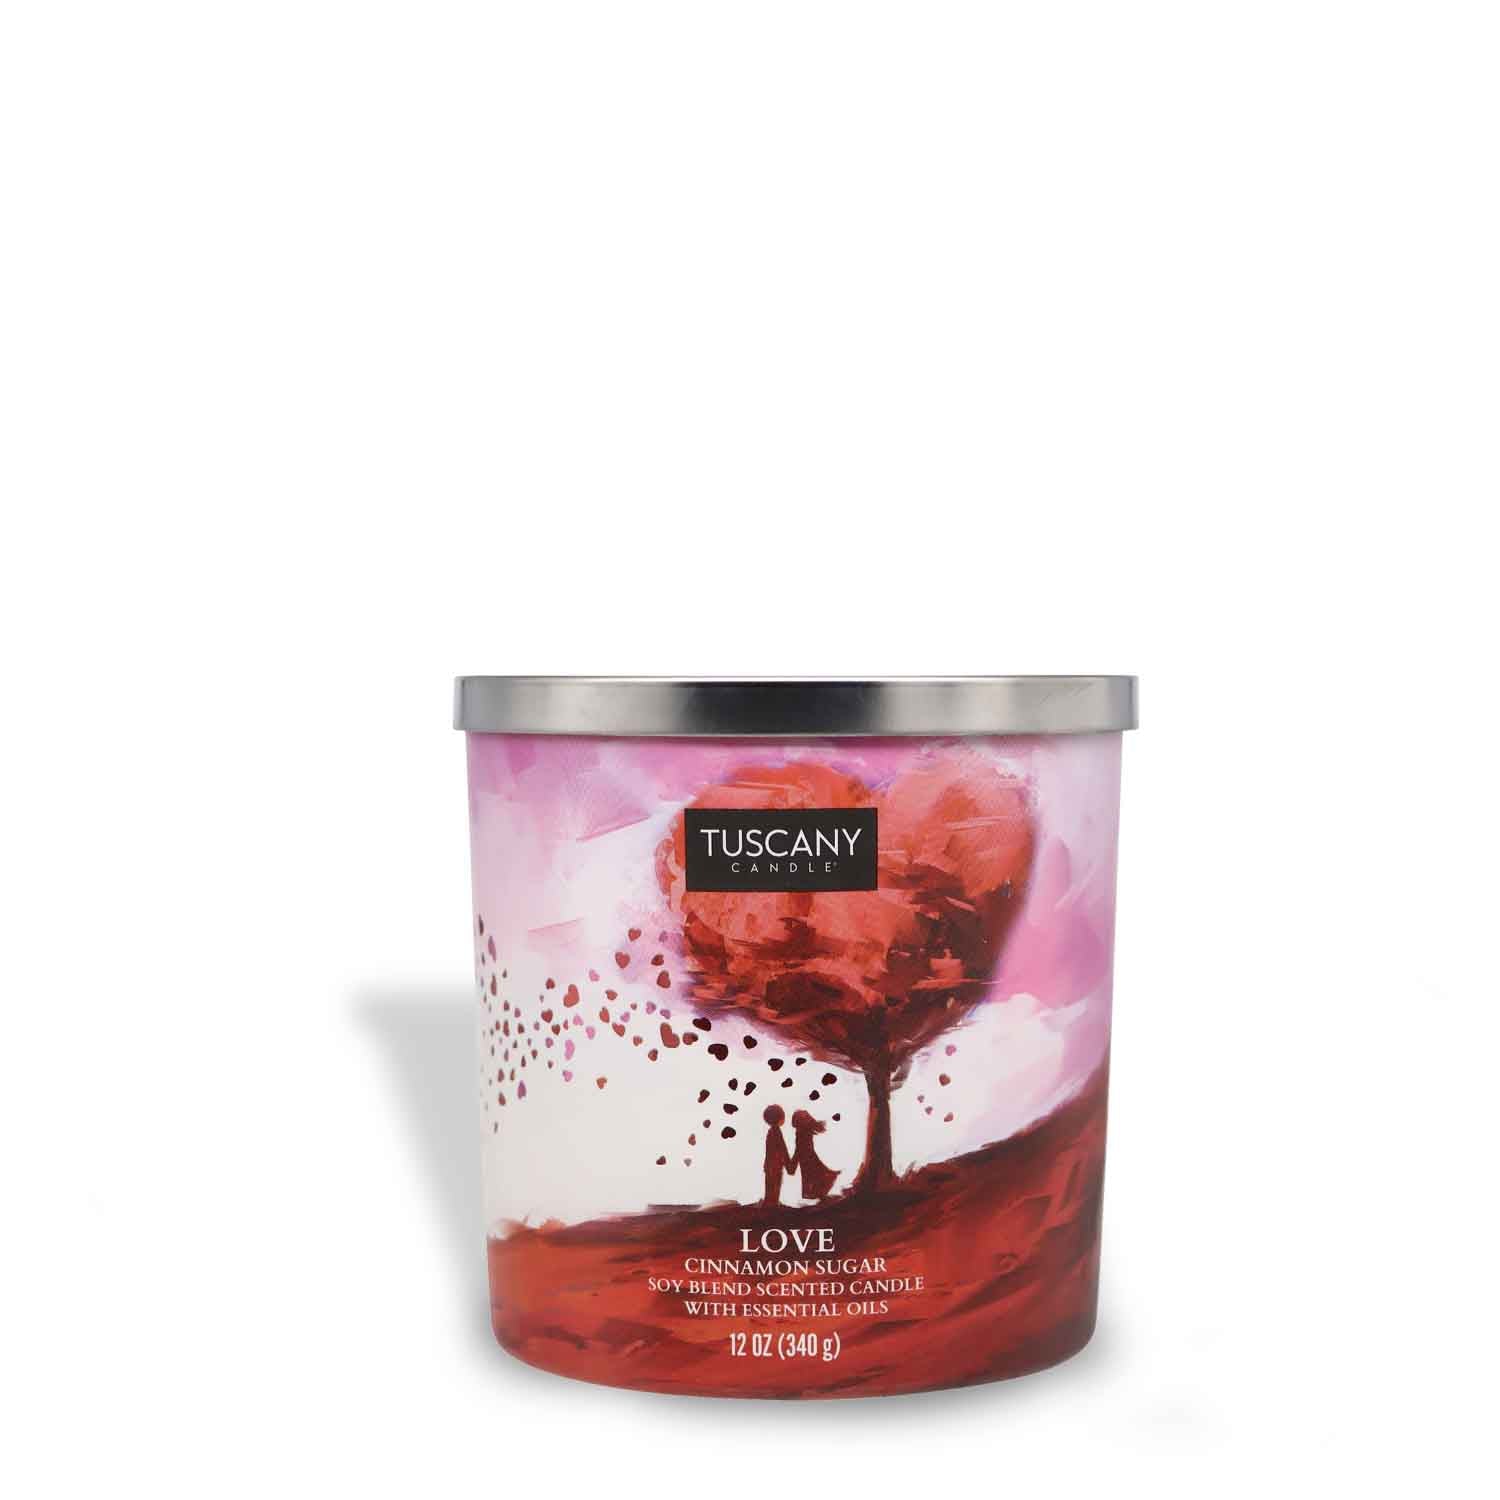 A passionate Love Scented Jar Candle (12 oz) - Carried Away Collection  in a fiery red Tuscany Candle® SEASONAL container.